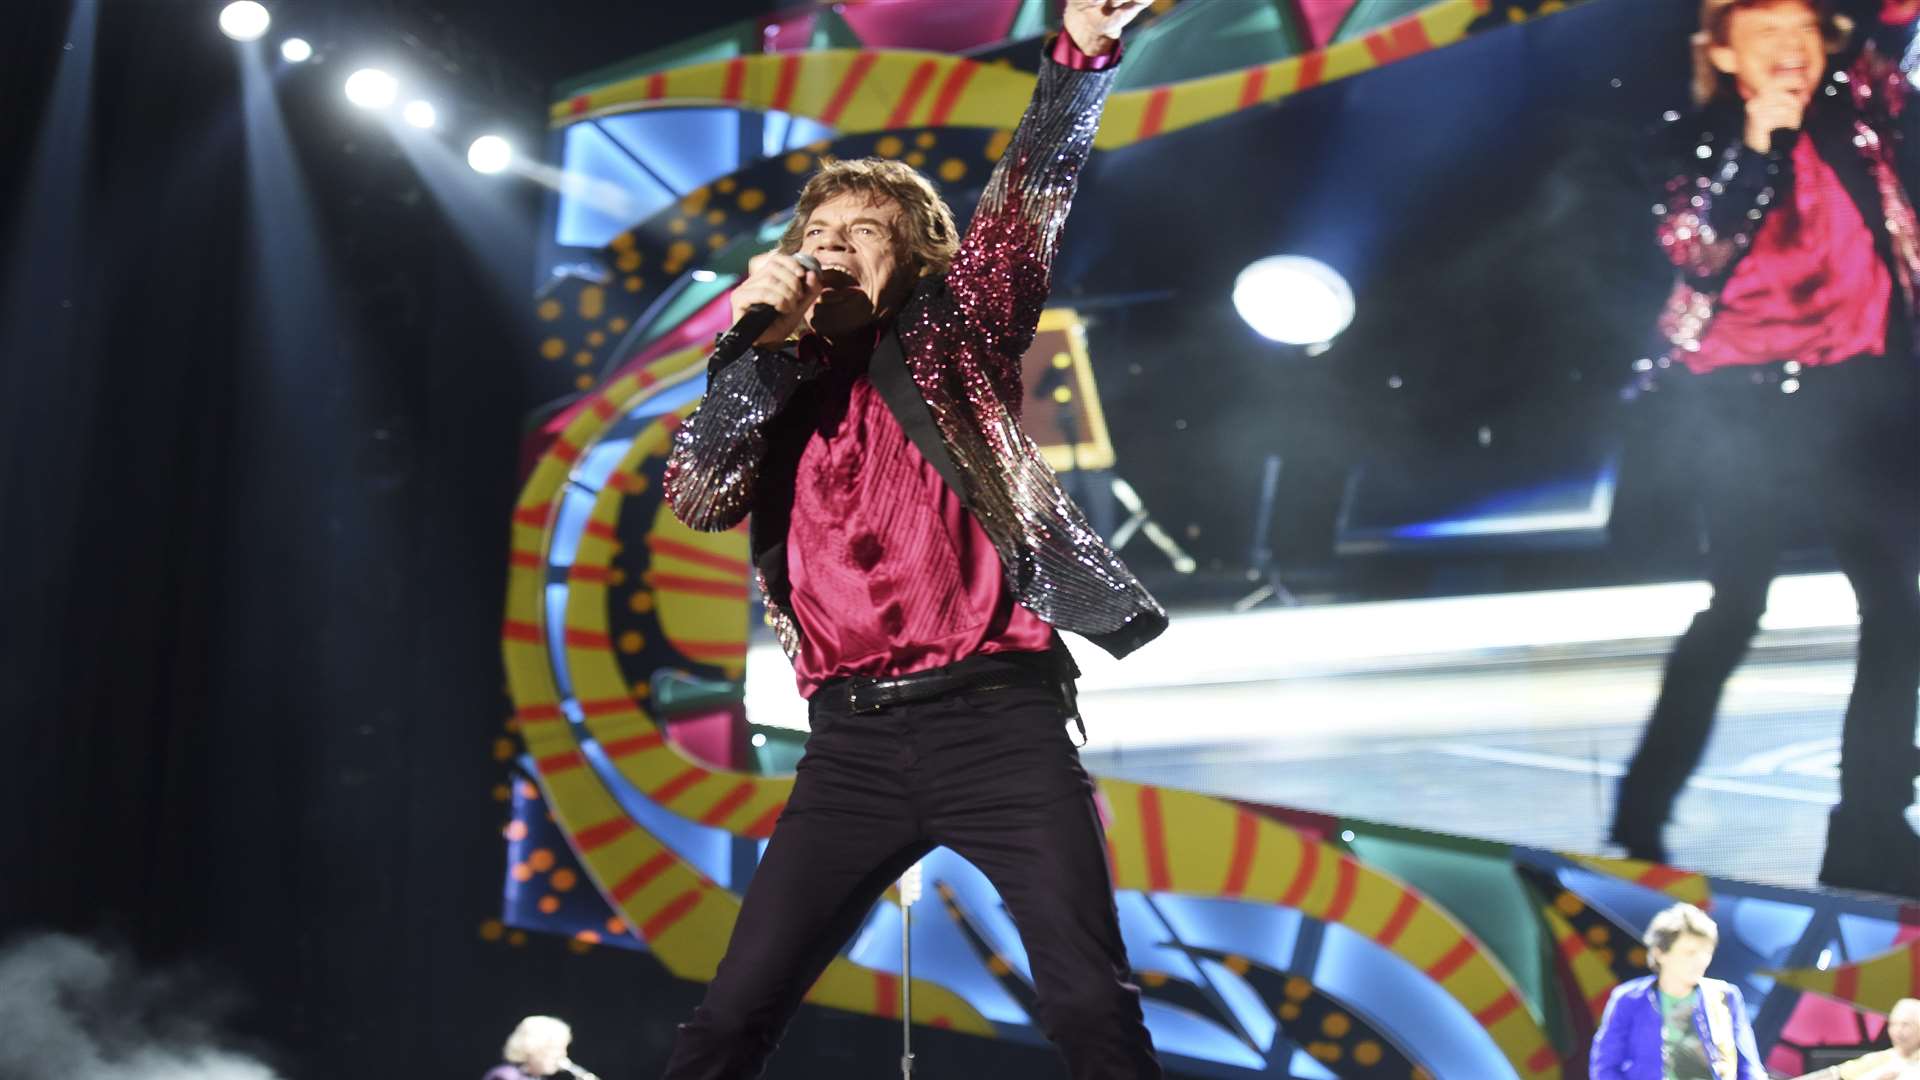 Mick Jagger live on stage